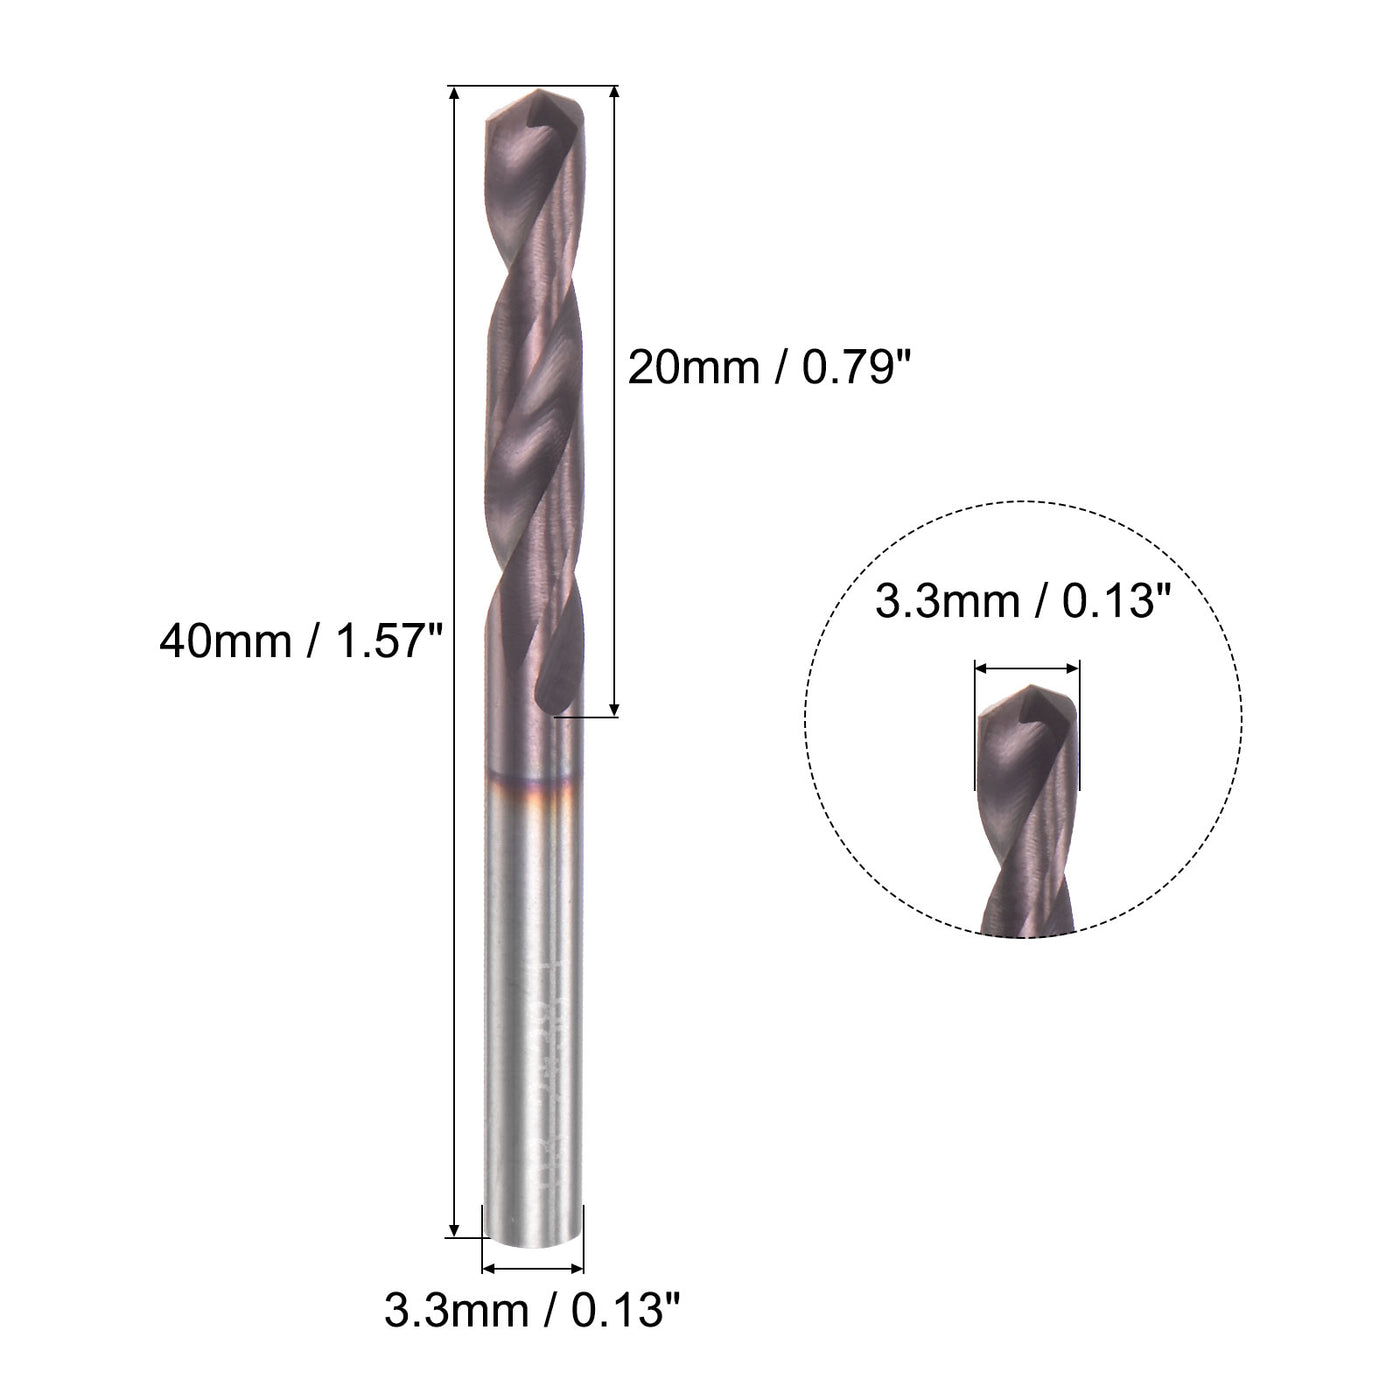 uxcell Uxcell 3.3mm DIN K45 Tungsten Carbide AlTiSin Coated Drill Bit for Stainless Steel